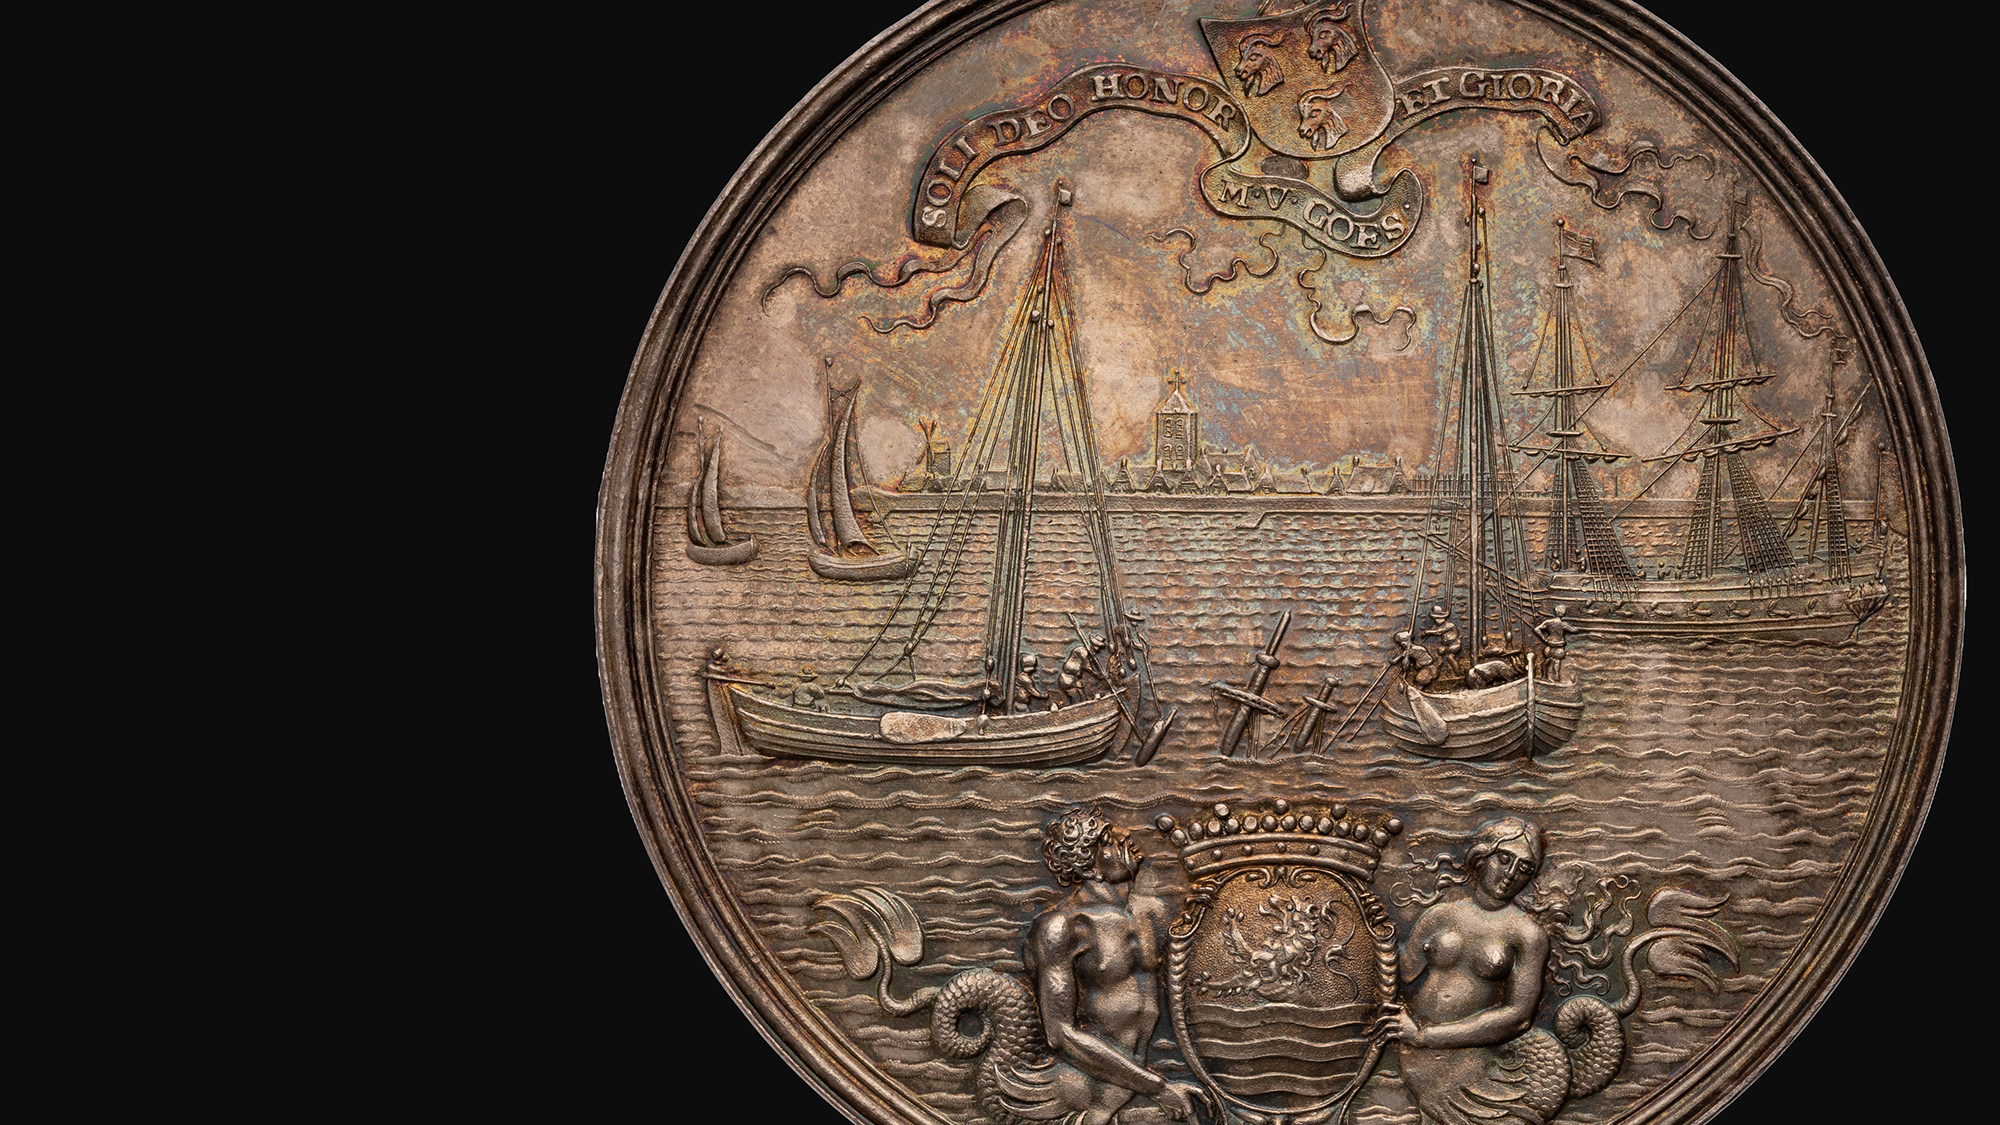 Long Table 169. Ships, Shipwrecks and Medals in the 17th Century